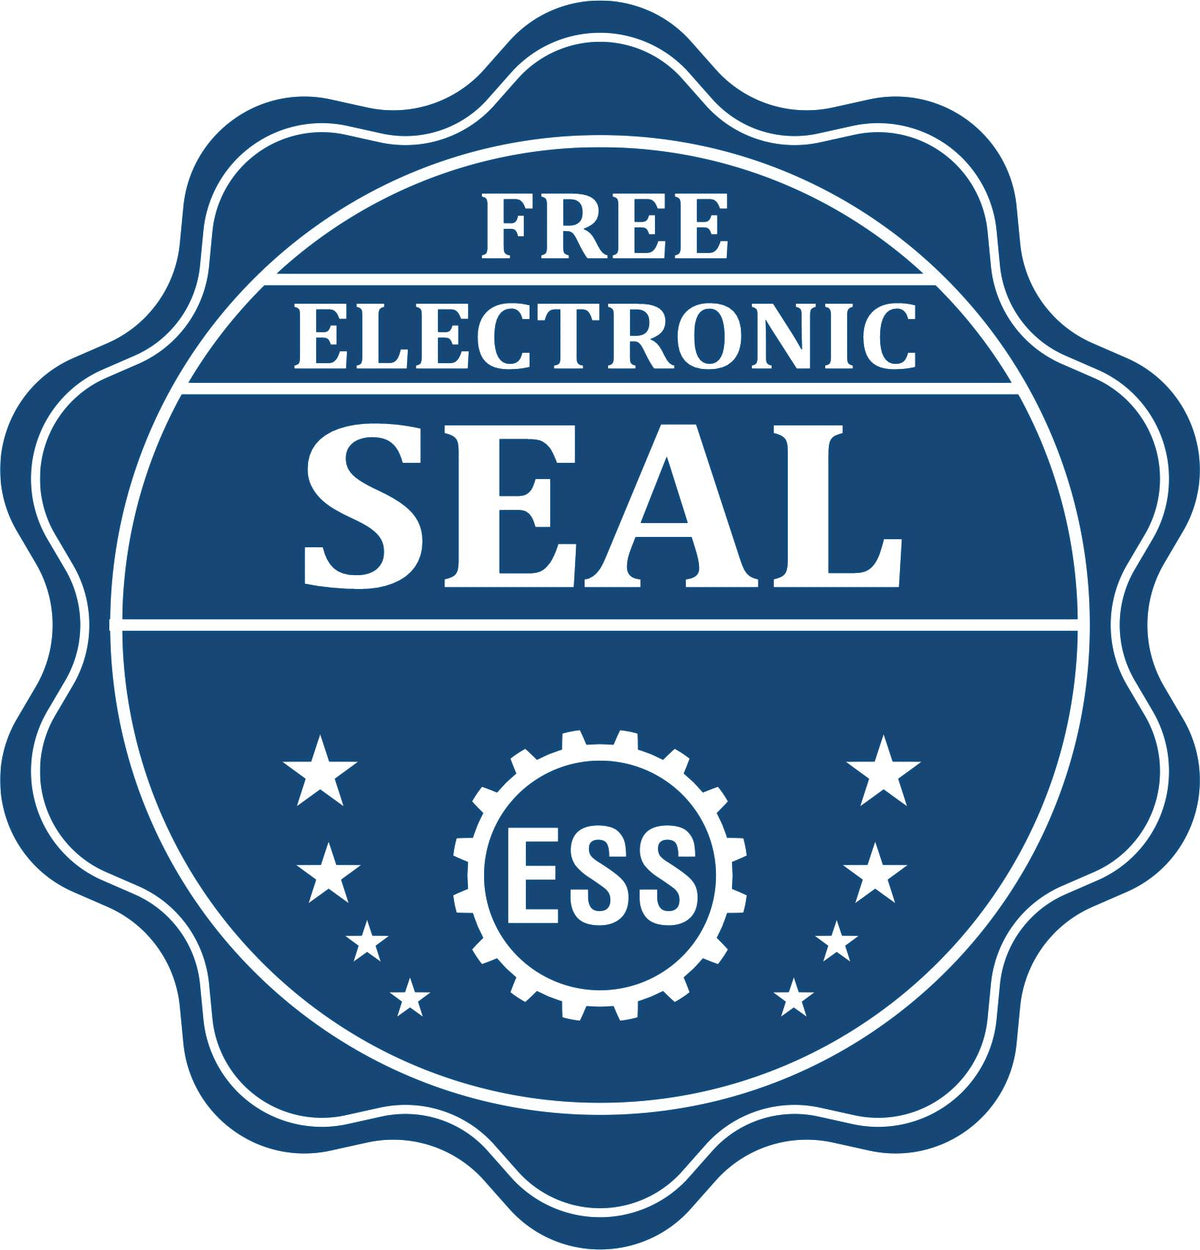 A badge showing a free electronic seal for the Slim Pre-Inked Tennessee Professional Geologist Seal Stamp with stars and the ESS gear on the emblem.